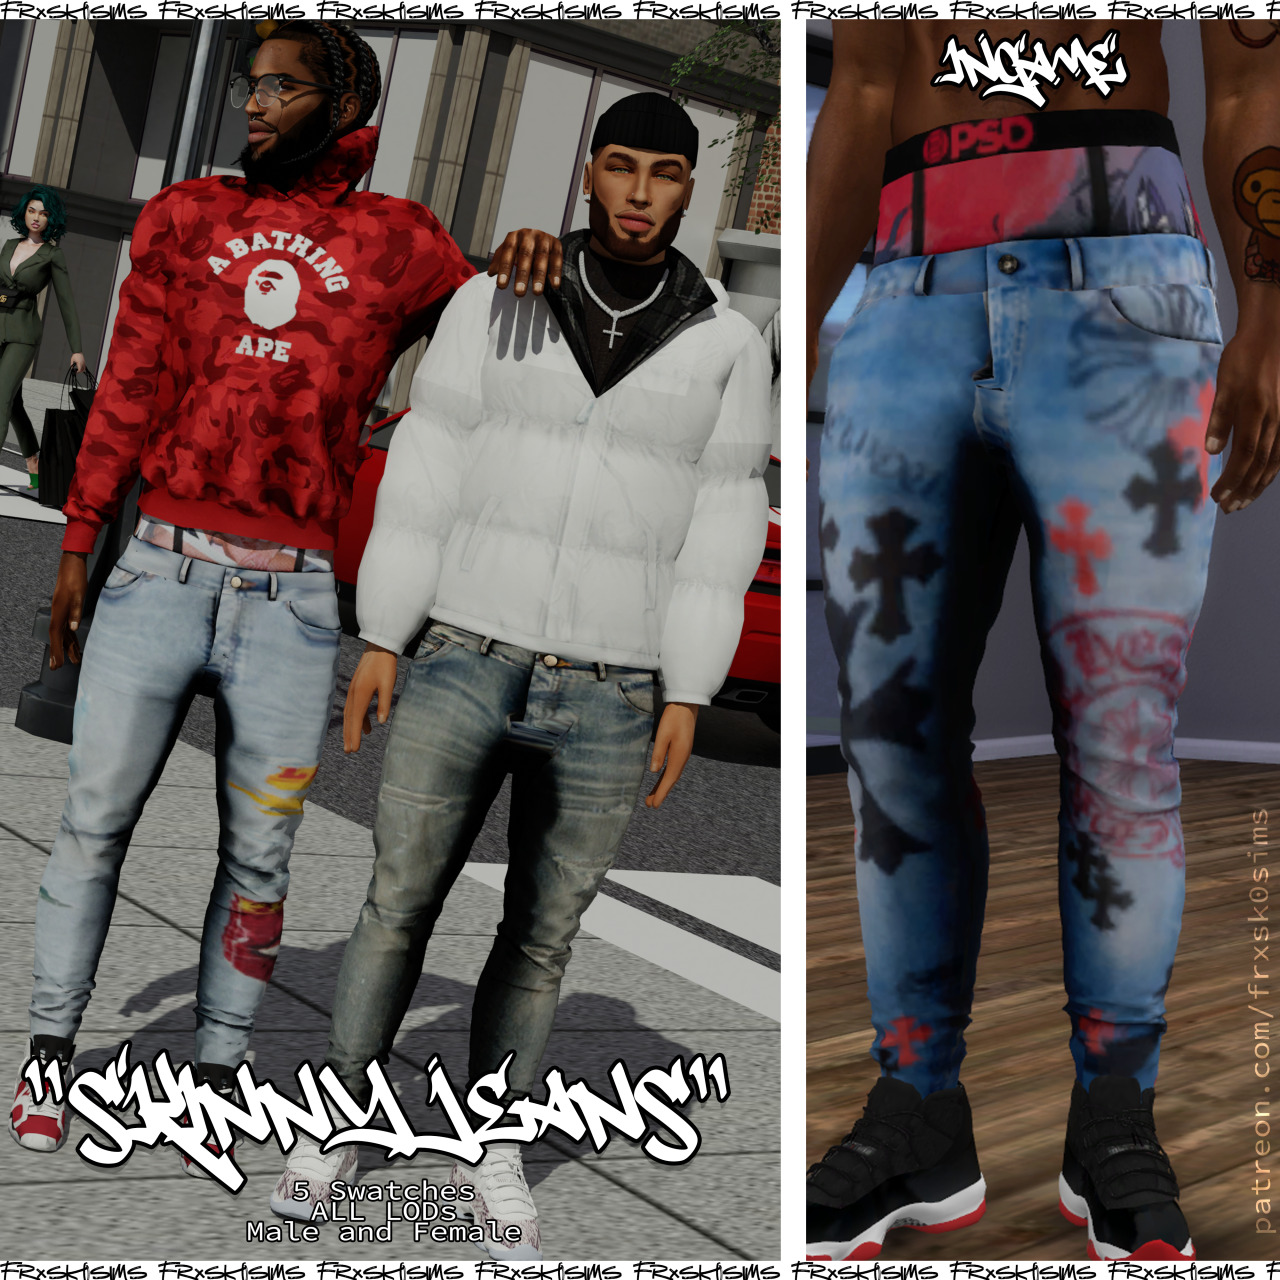 urban cc finds ♡ : frxsk0sims: Sagging Skinny Jeans Hey everyone!...